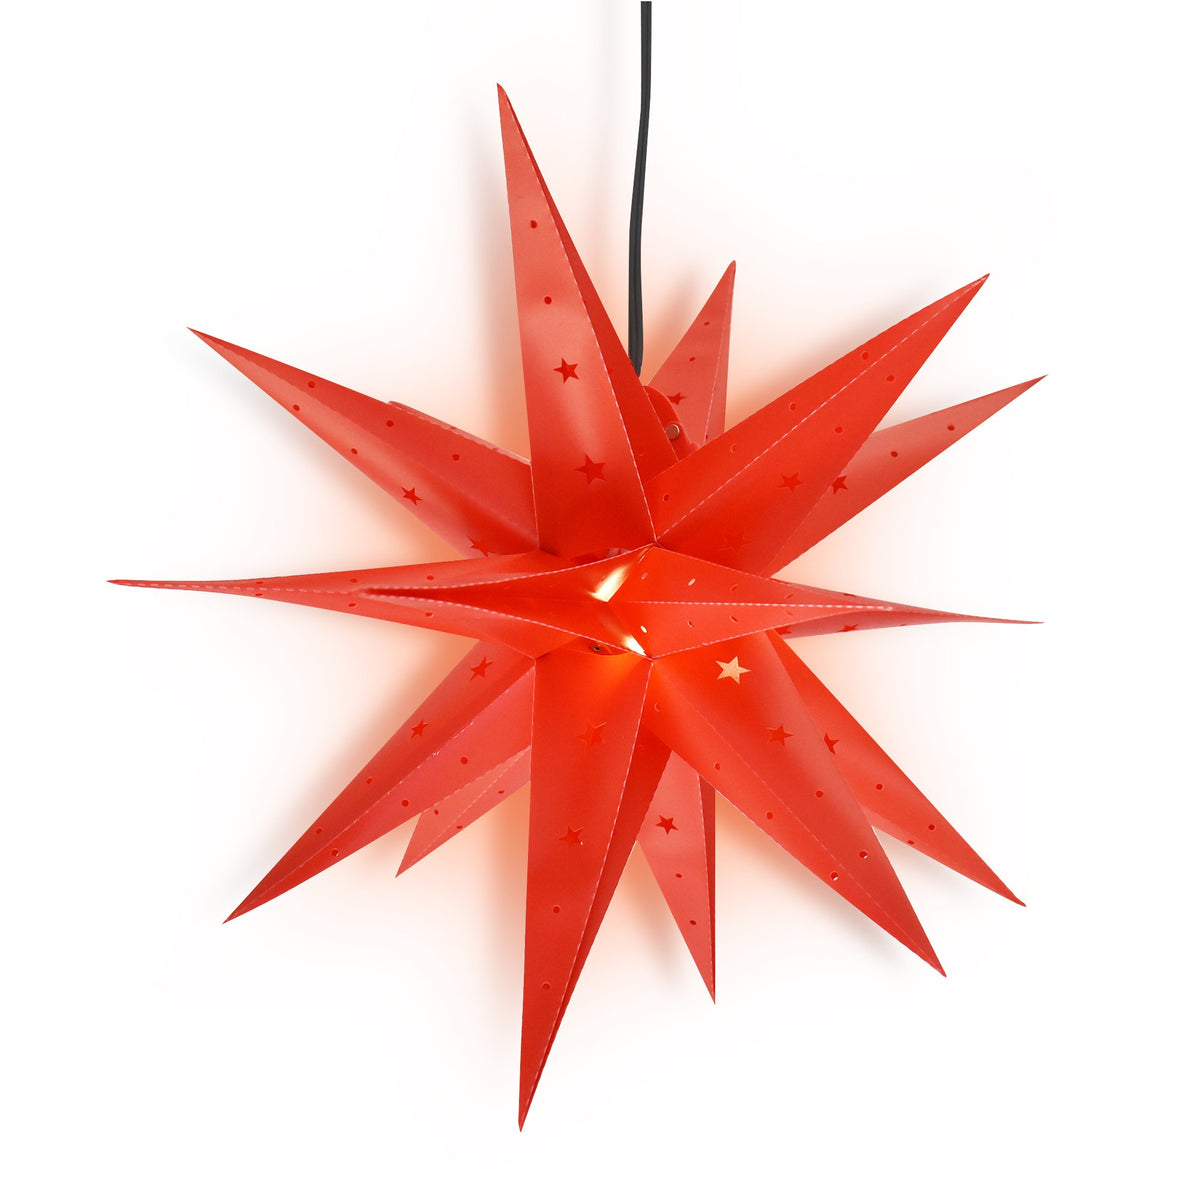 23&quot; Red Moravian Weatherproof Star Lantern Lamp, Multi-Point Hanging Decoration (Shade Only)